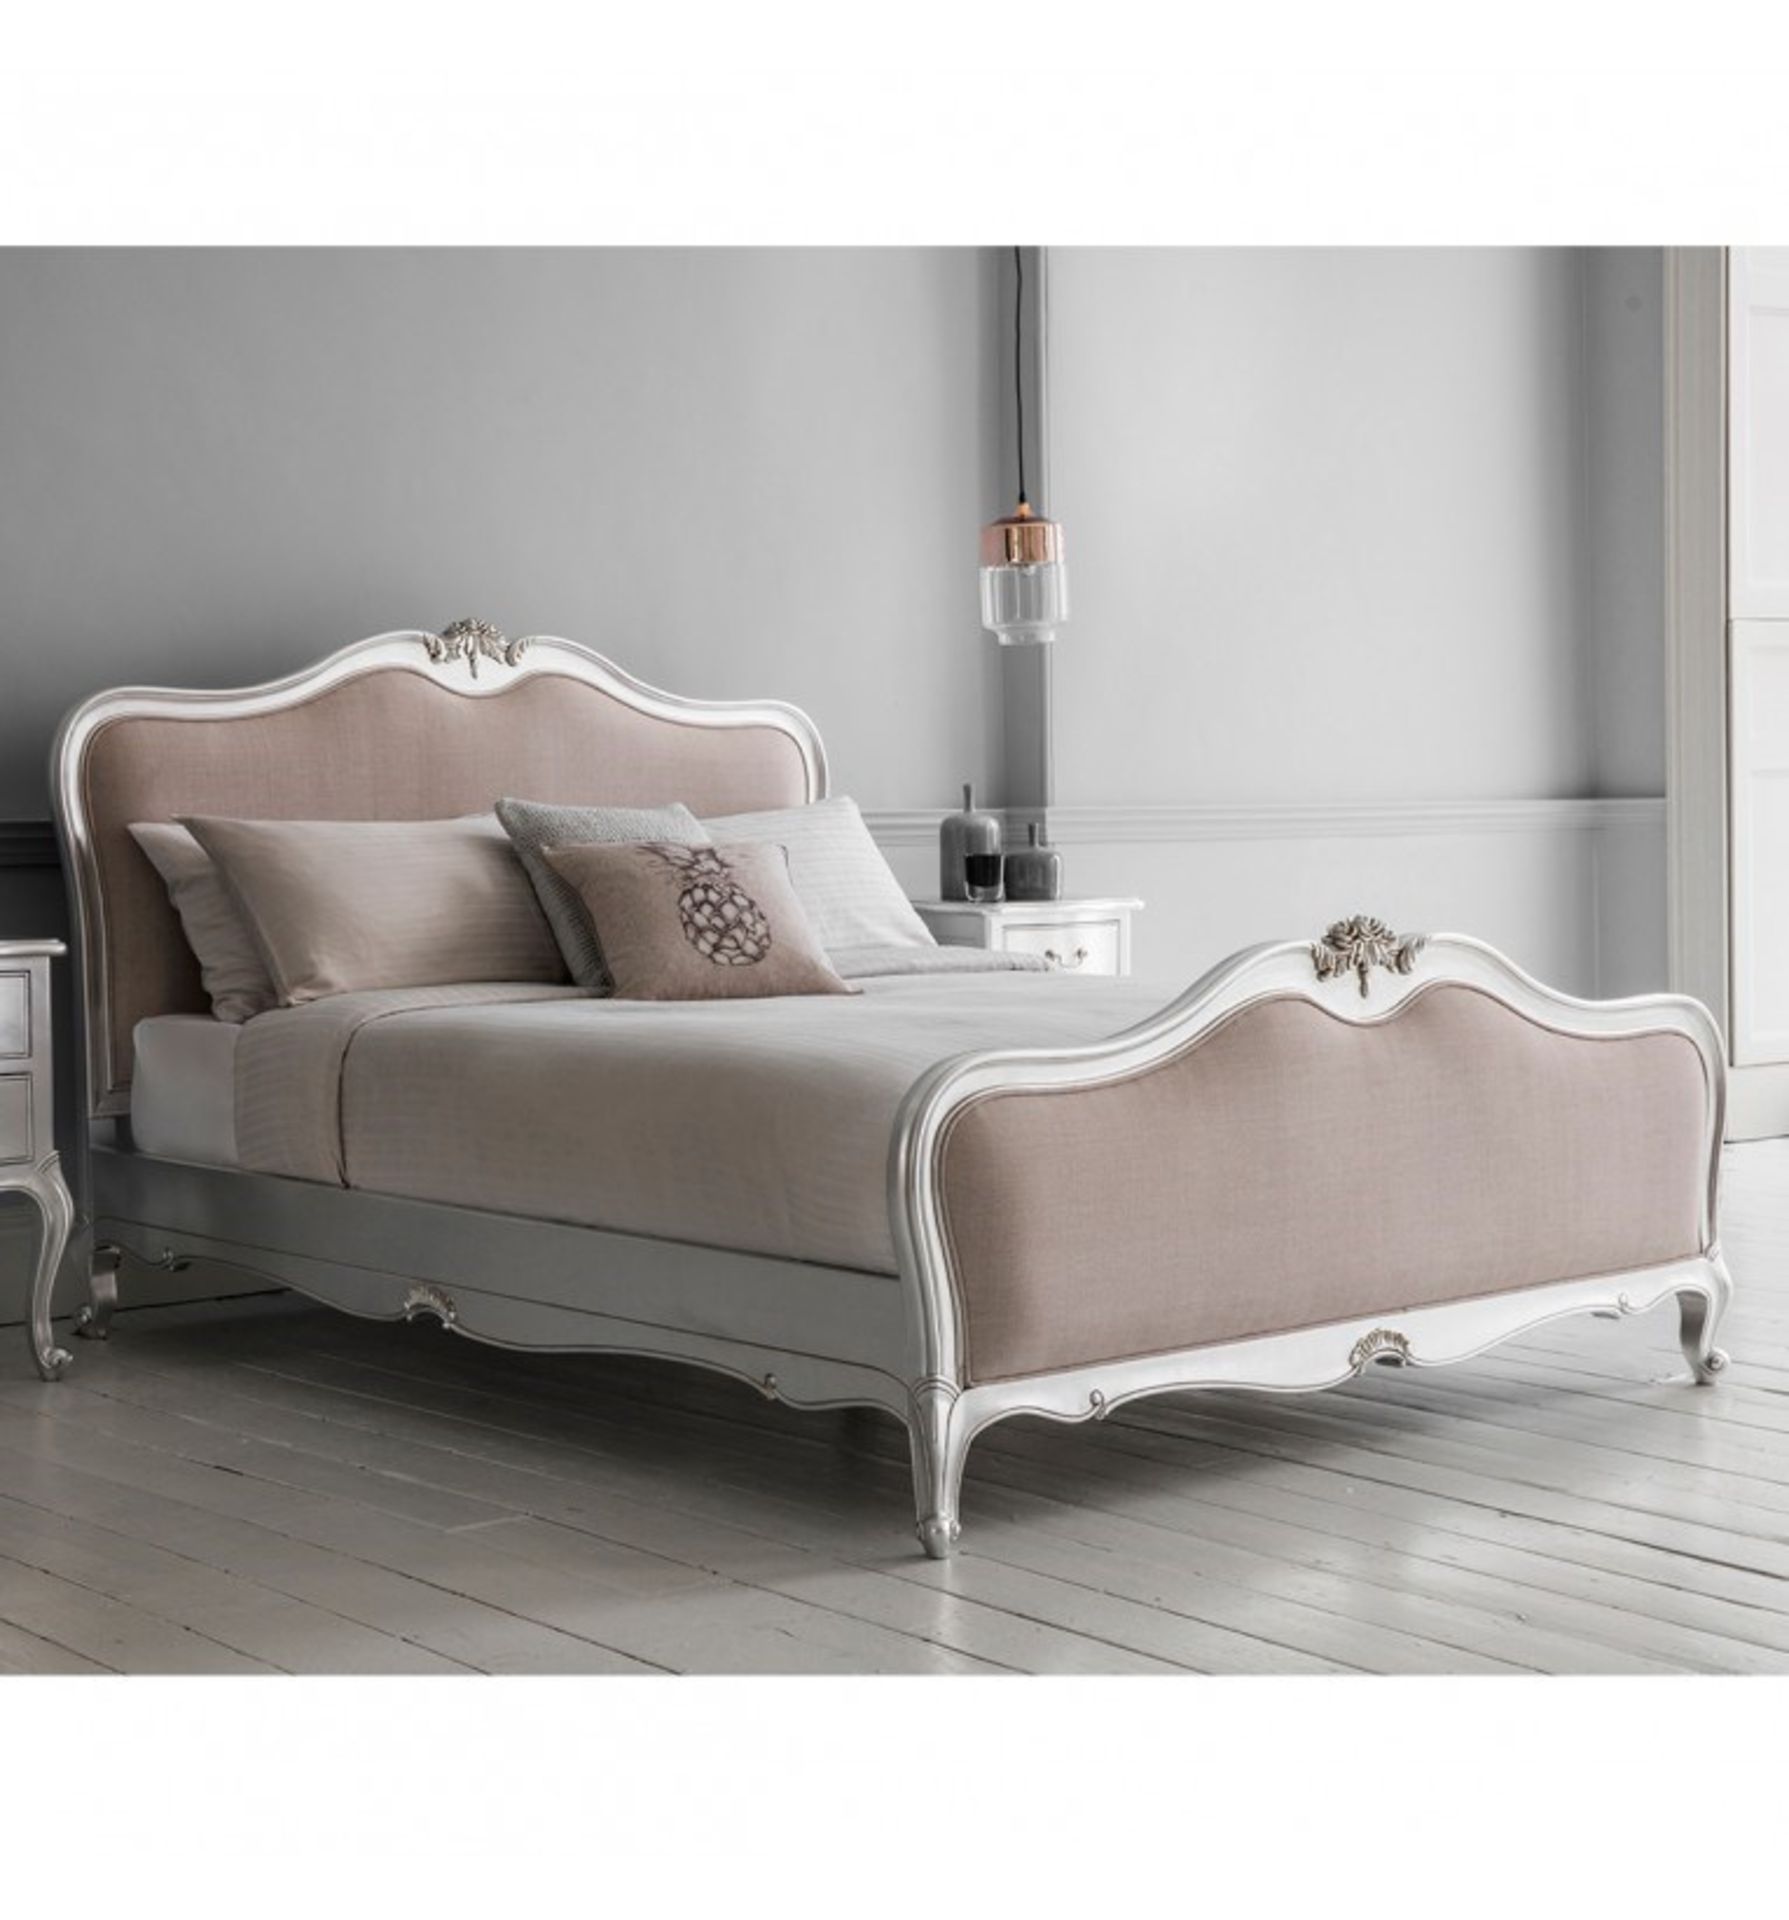 Chic 6 Linen Upholstered Bed Silver Handcrafted with exquisite attention to detail the Chic range in